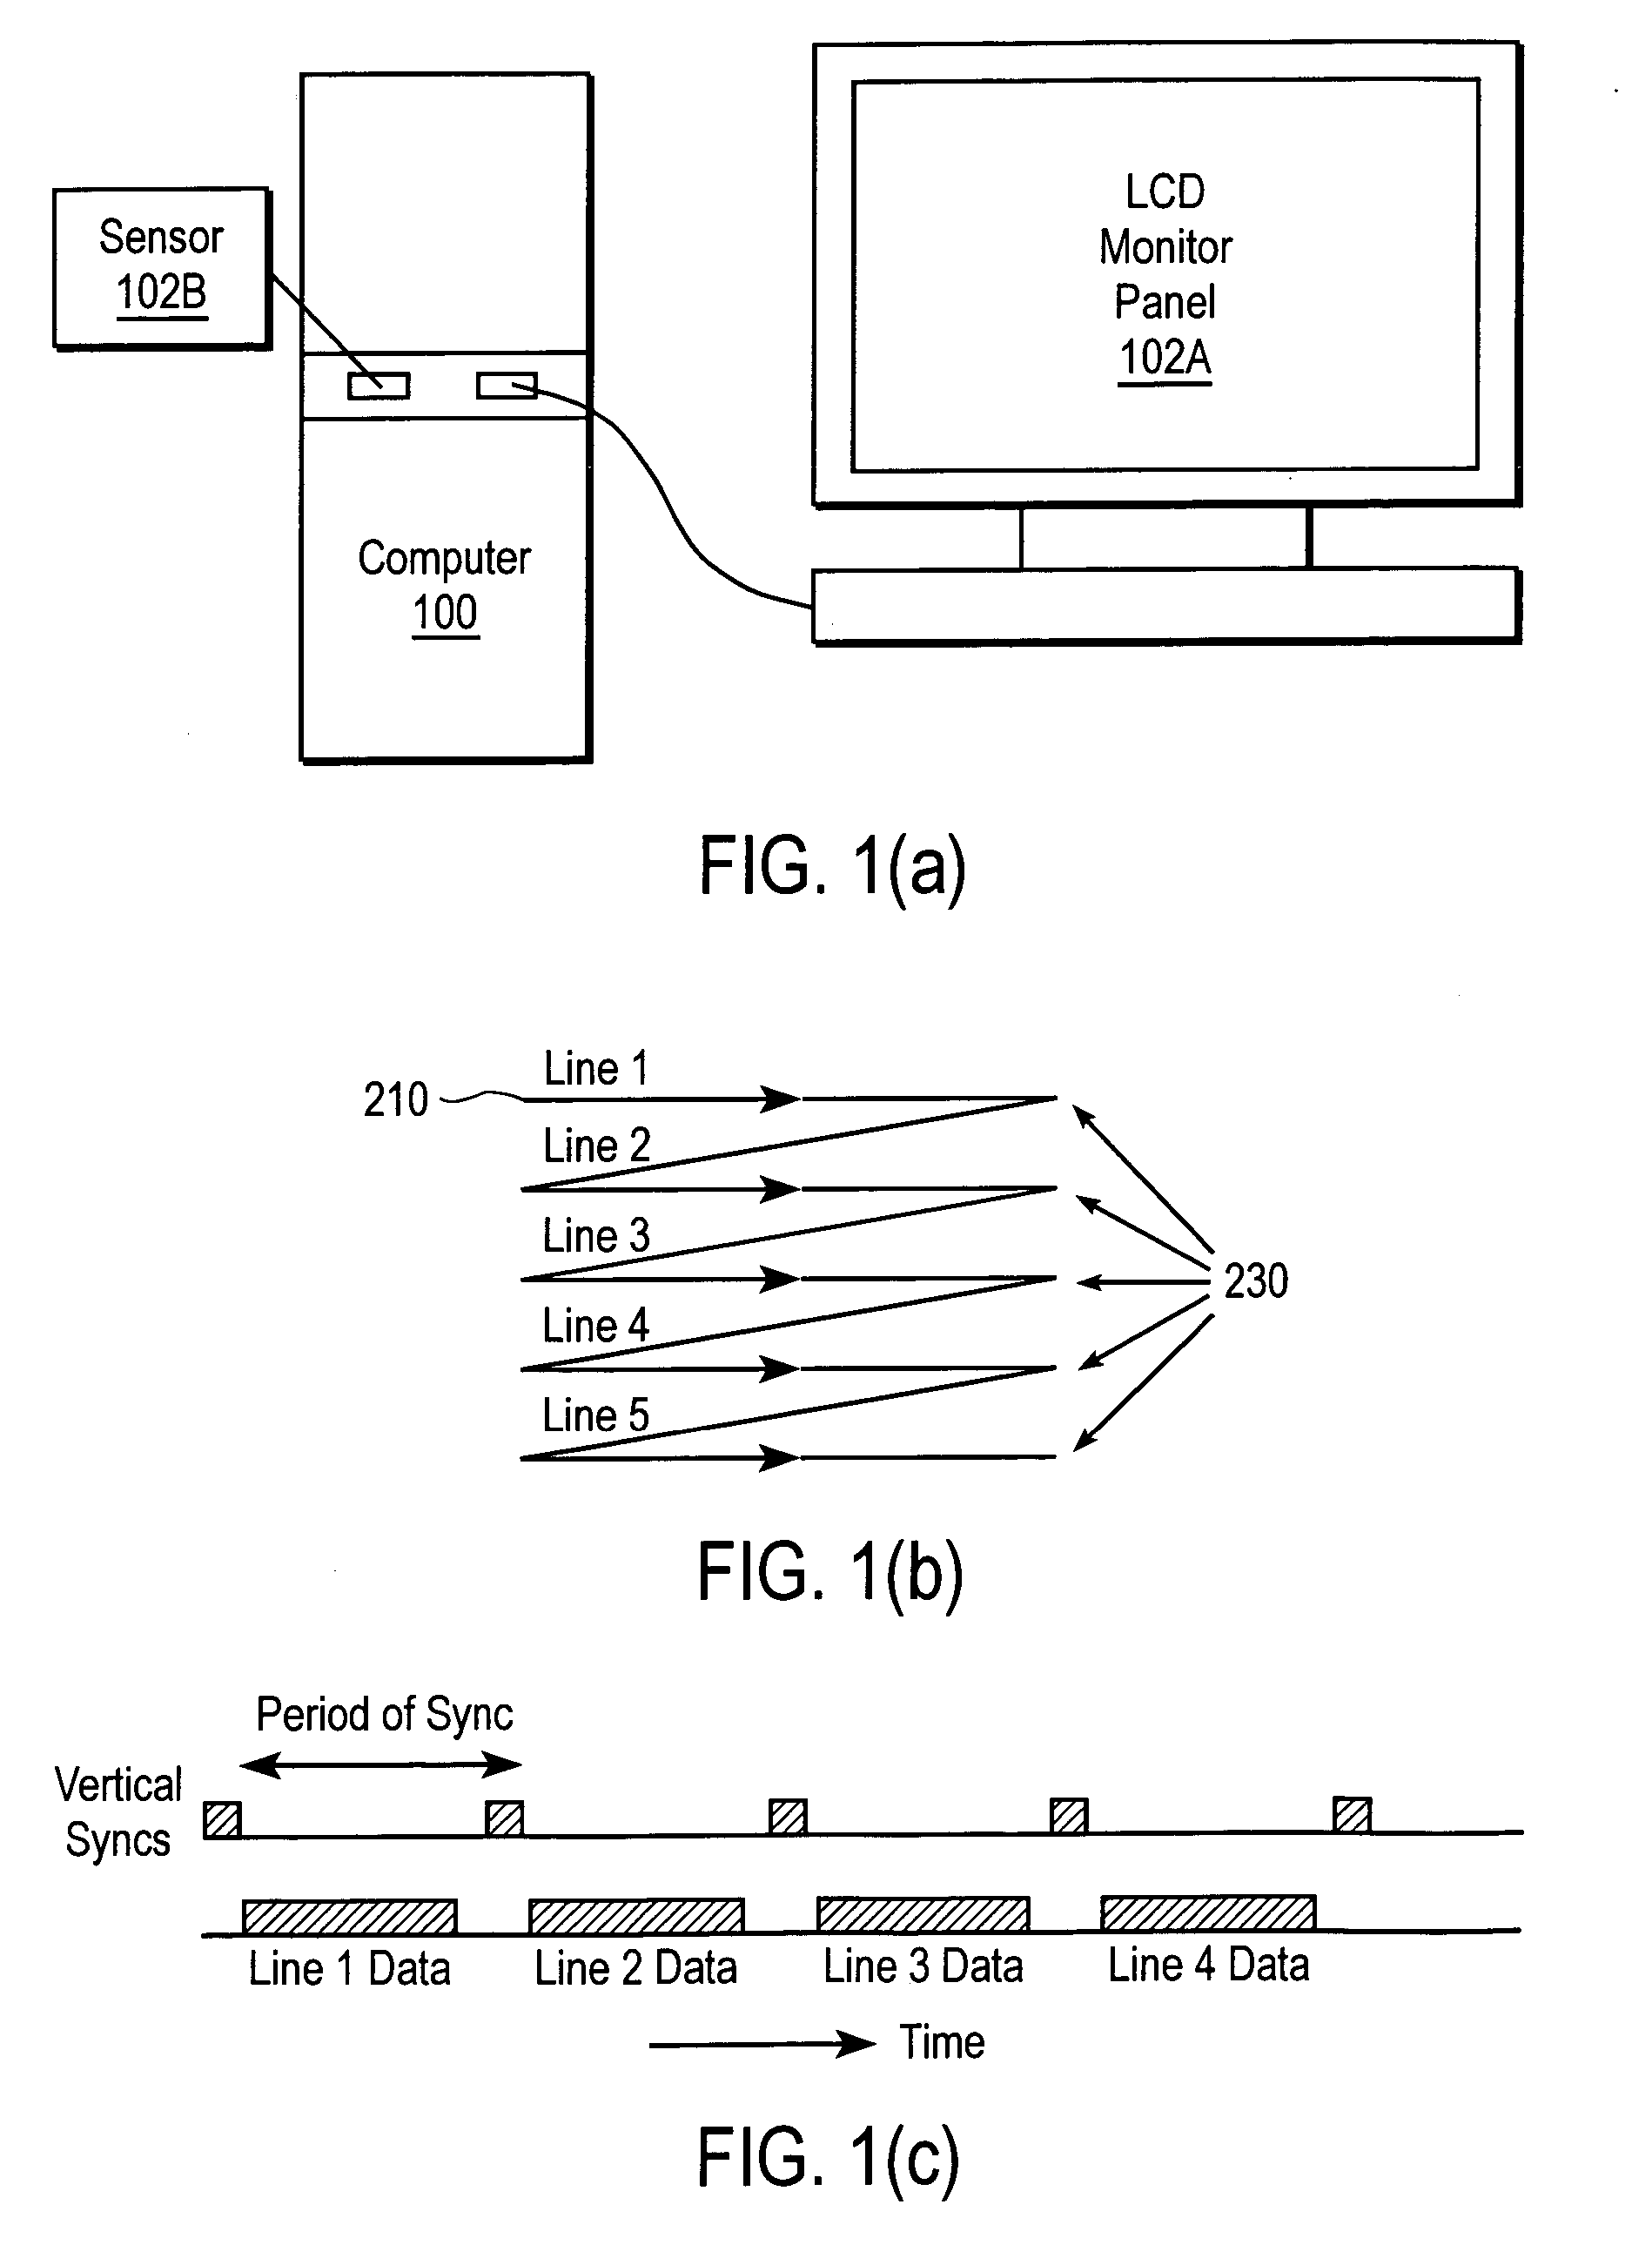 System for transmission of synchronous video with compression through channels with varying transmission delay